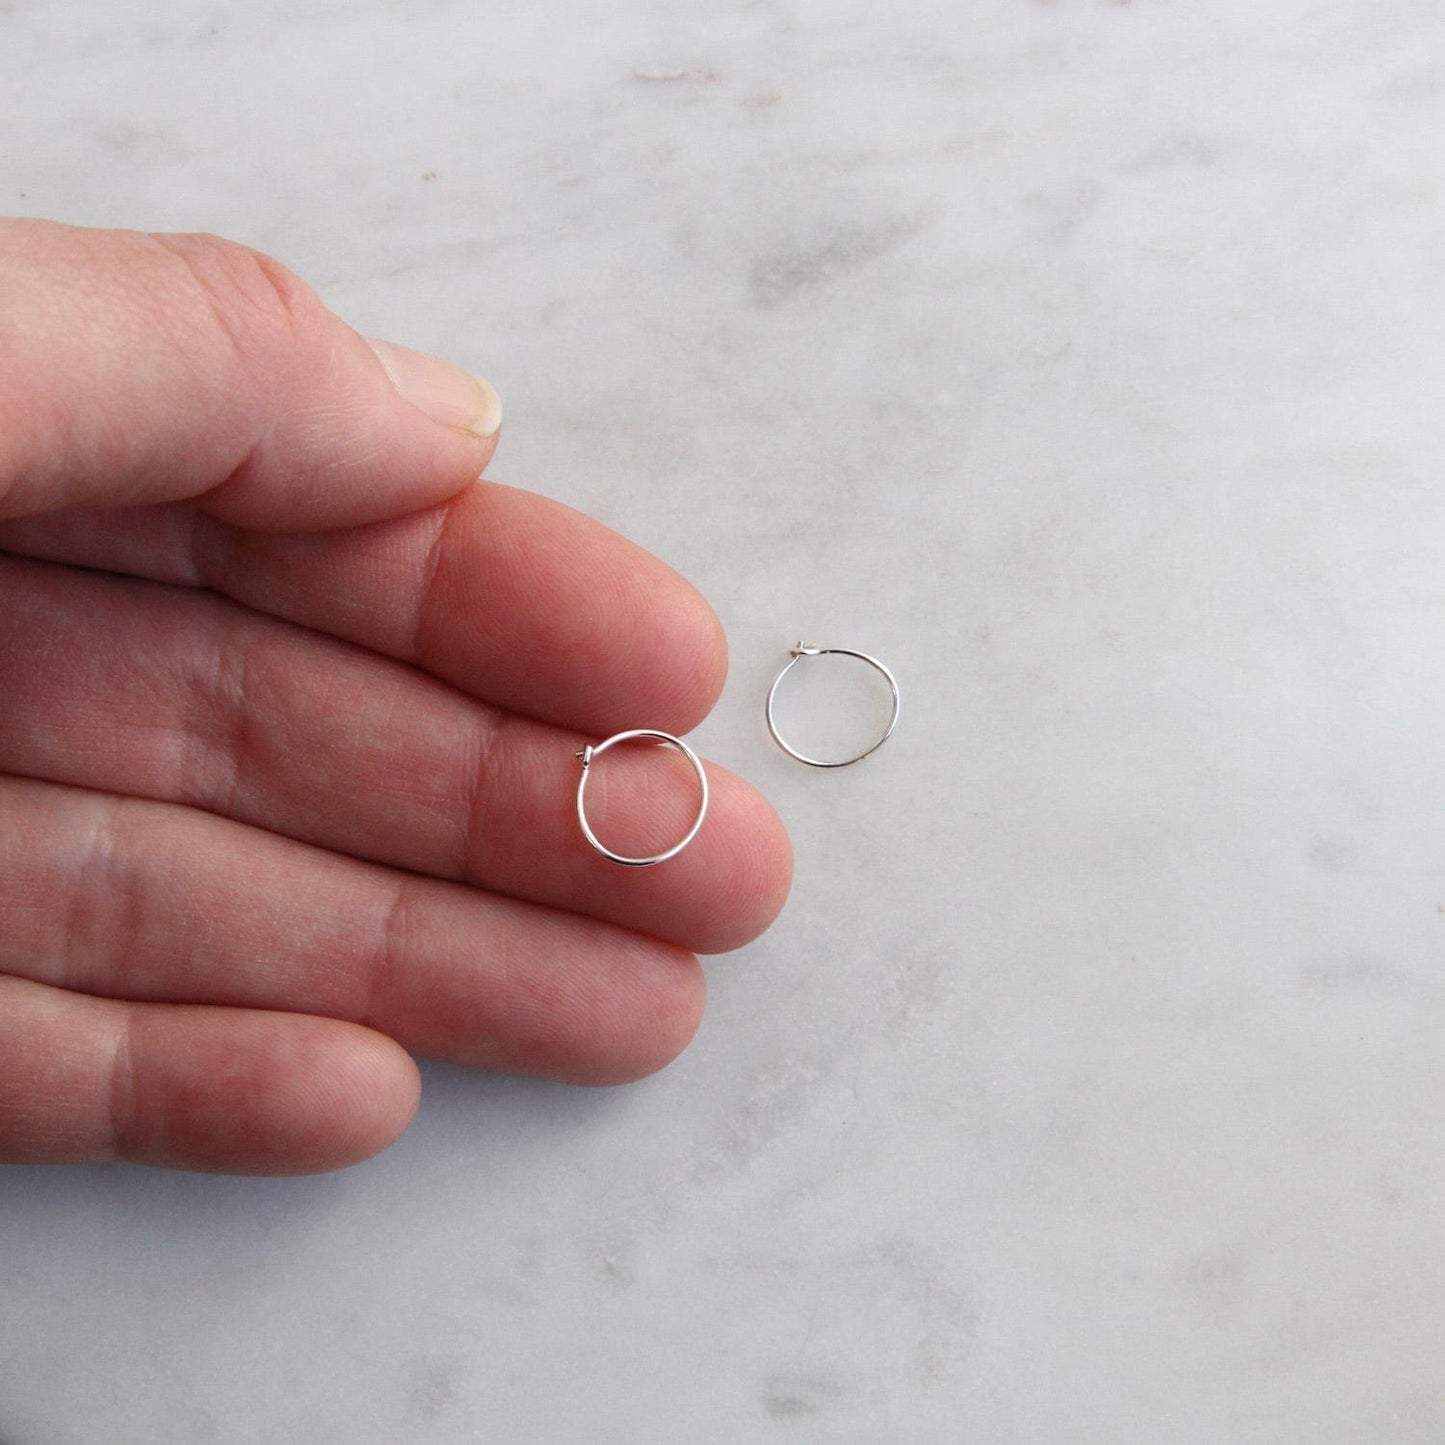 EAR Tiny 10mm Thin Sterling Silver Hoop